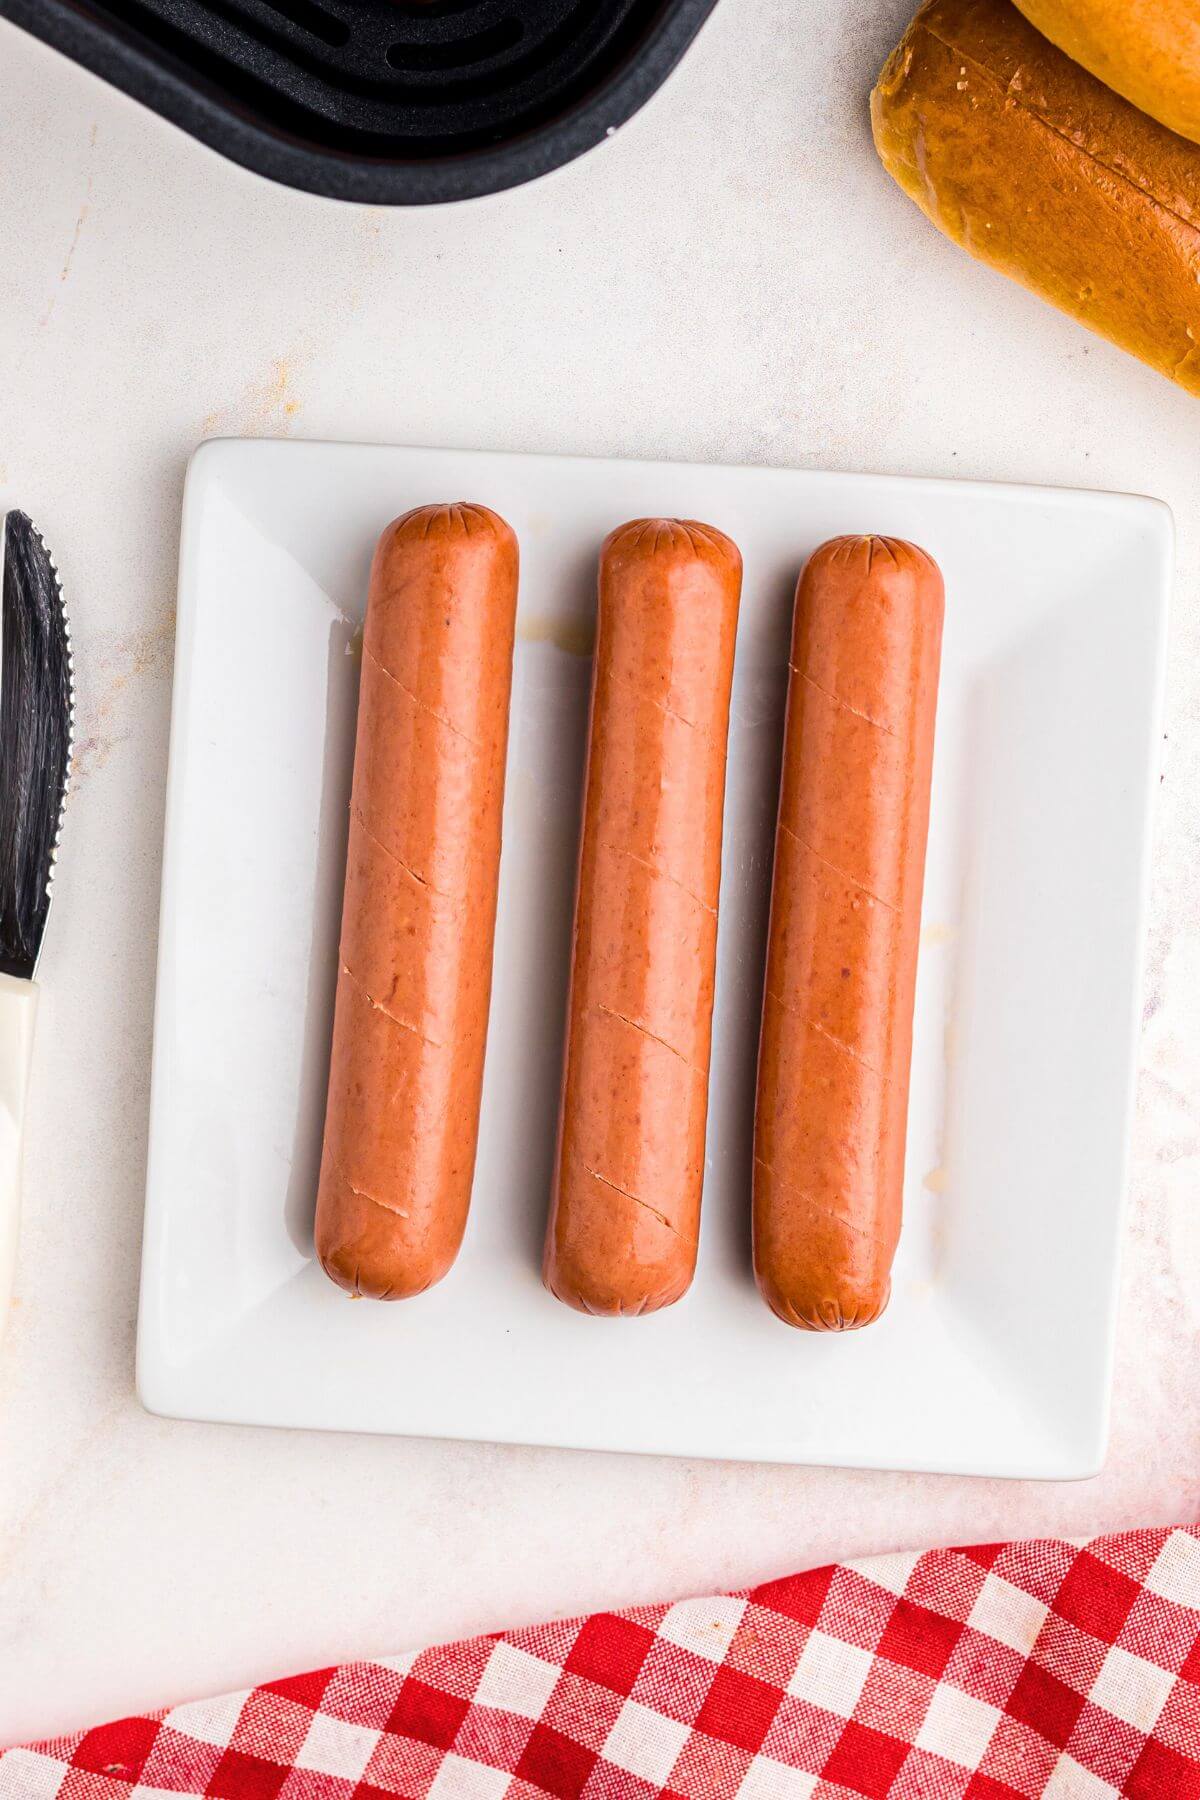 Uncooked hot dogs with slits cut into them on a white plate. 